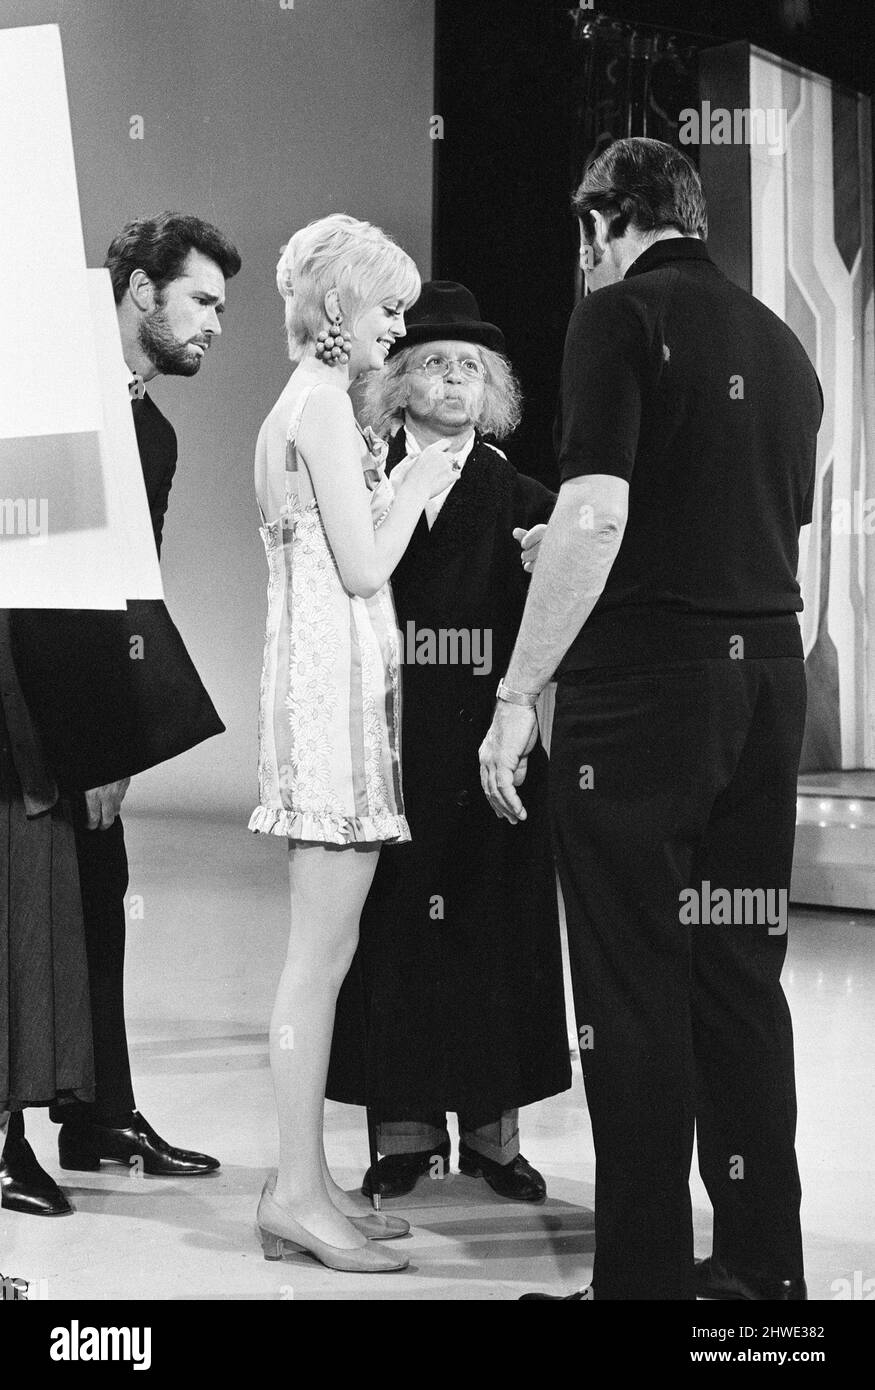 Rowan & Martin's Laugh-In, an American sketch comedy television program on the NBC television network, behind the scenes filming for series 2 episode 22, (aired Monday 3rd March 1969), in studio, Wednesday 15th January 1969. Our picture shows ... Goldie Hawn, American actress and regular performer, with Arte Johnson and James Garner. Stock Photo